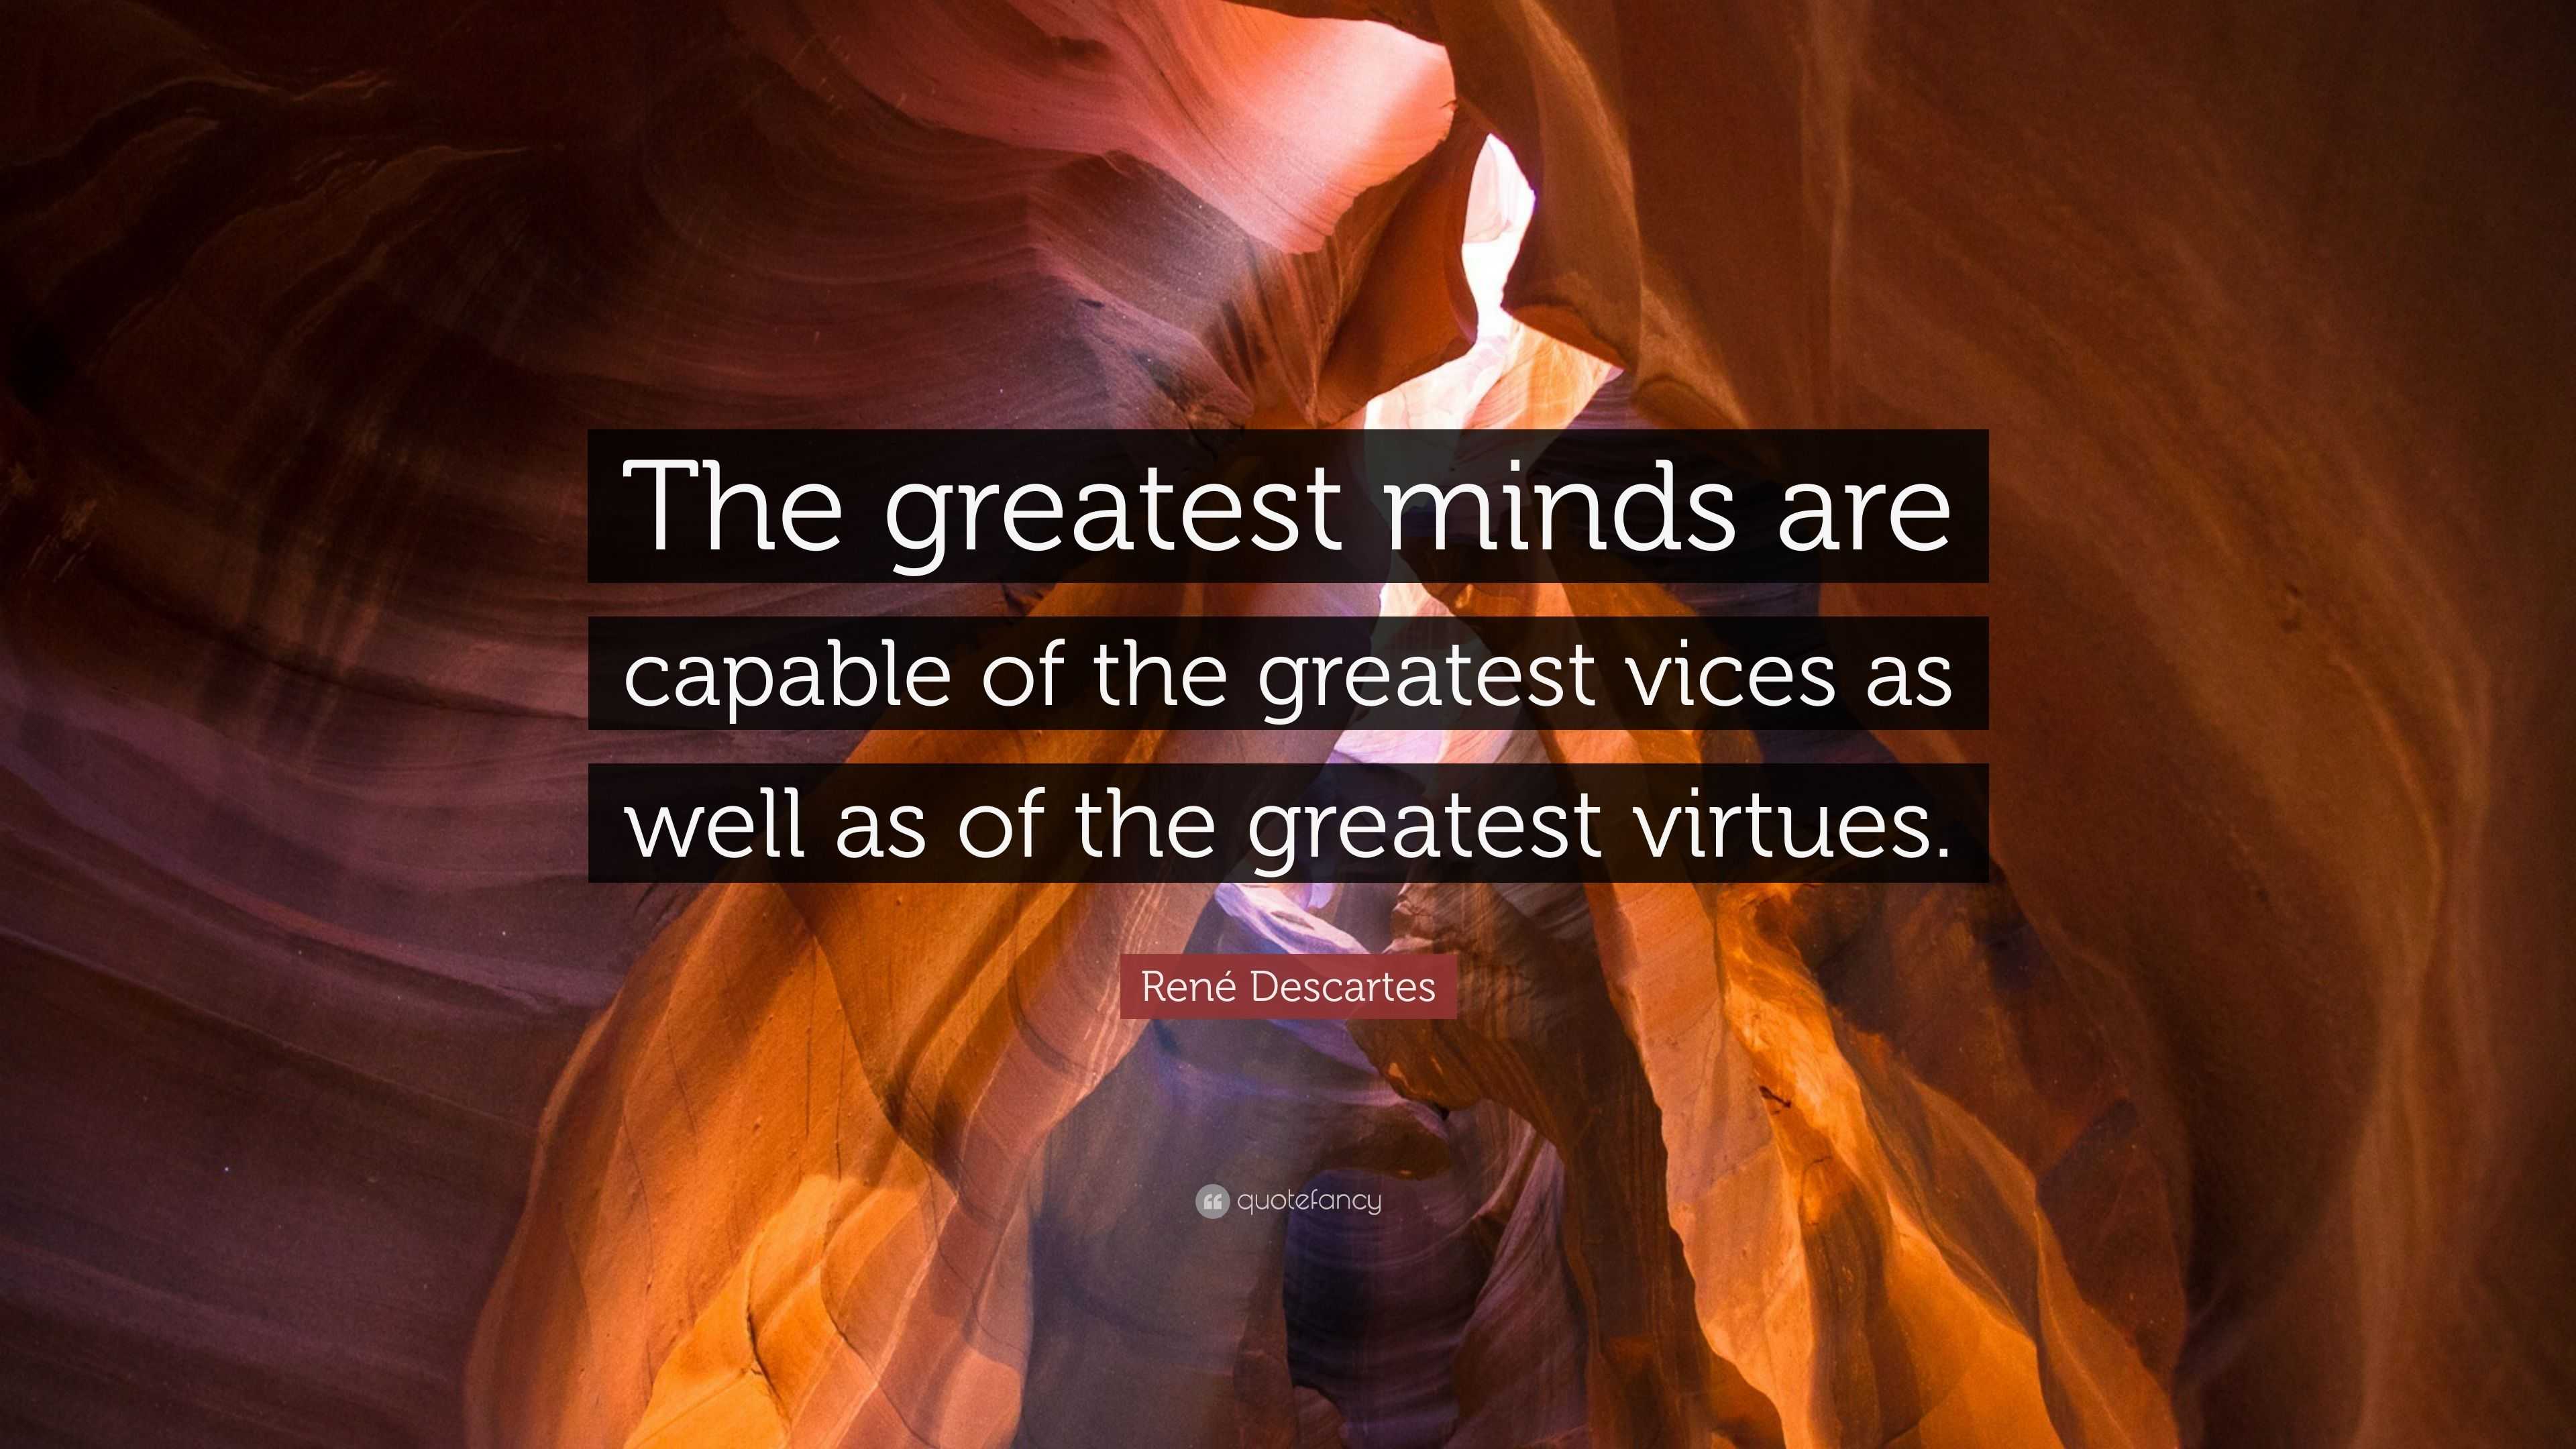 René Descartes Quote: “The greatest minds are capable of the greatest ...